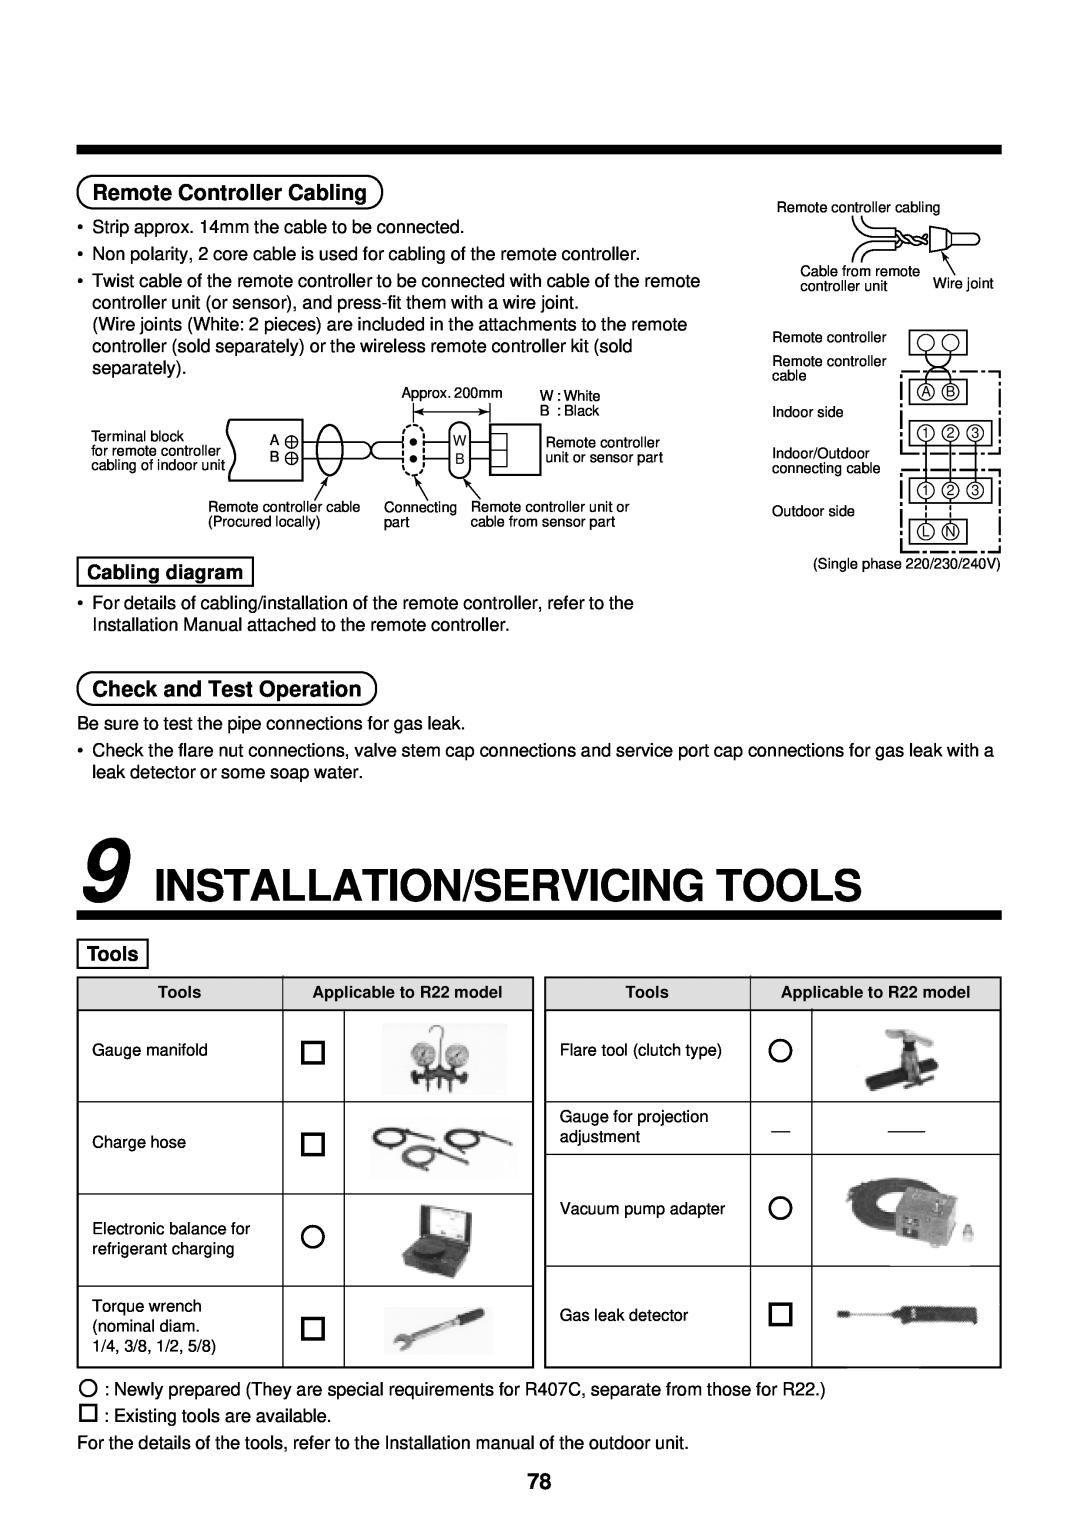 Toshiba RAM-SM560AT-E Installation/Servicing Tools, Remote Controller Cabling, Check and Test Operation, Cabling diagram 